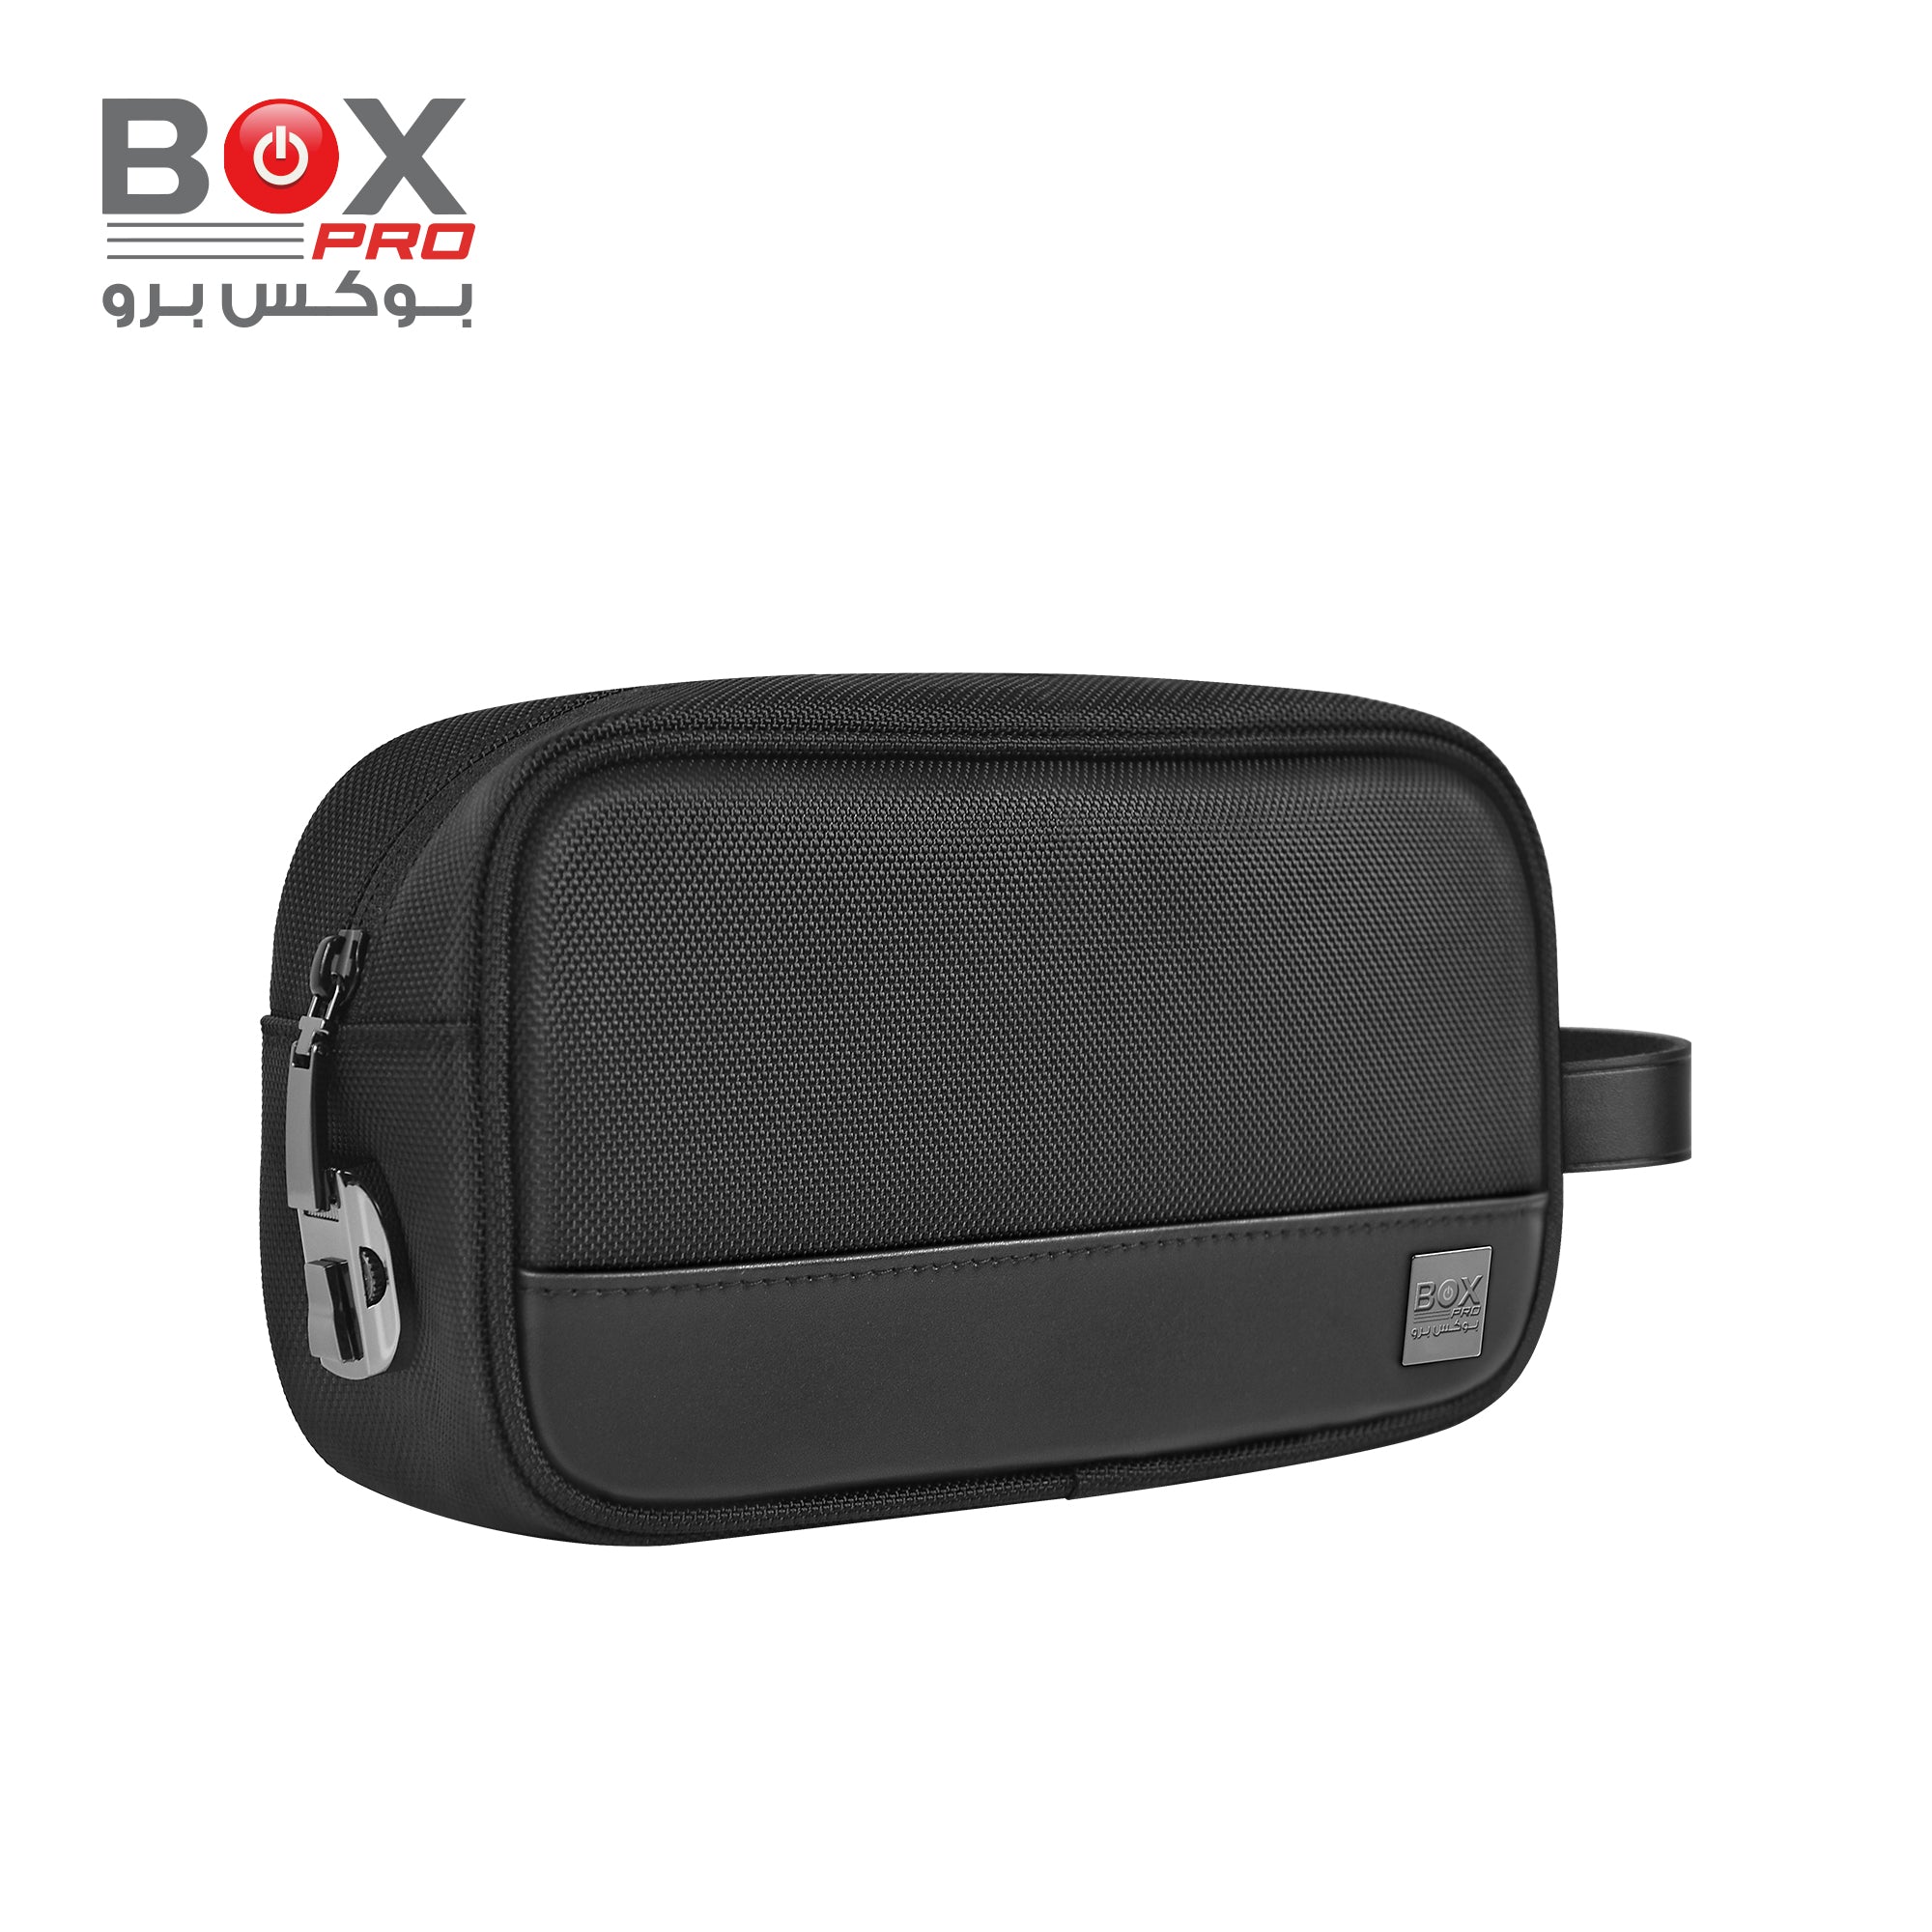 BoxPro Hali Travel Pouch H1 - Travel In Style - Black